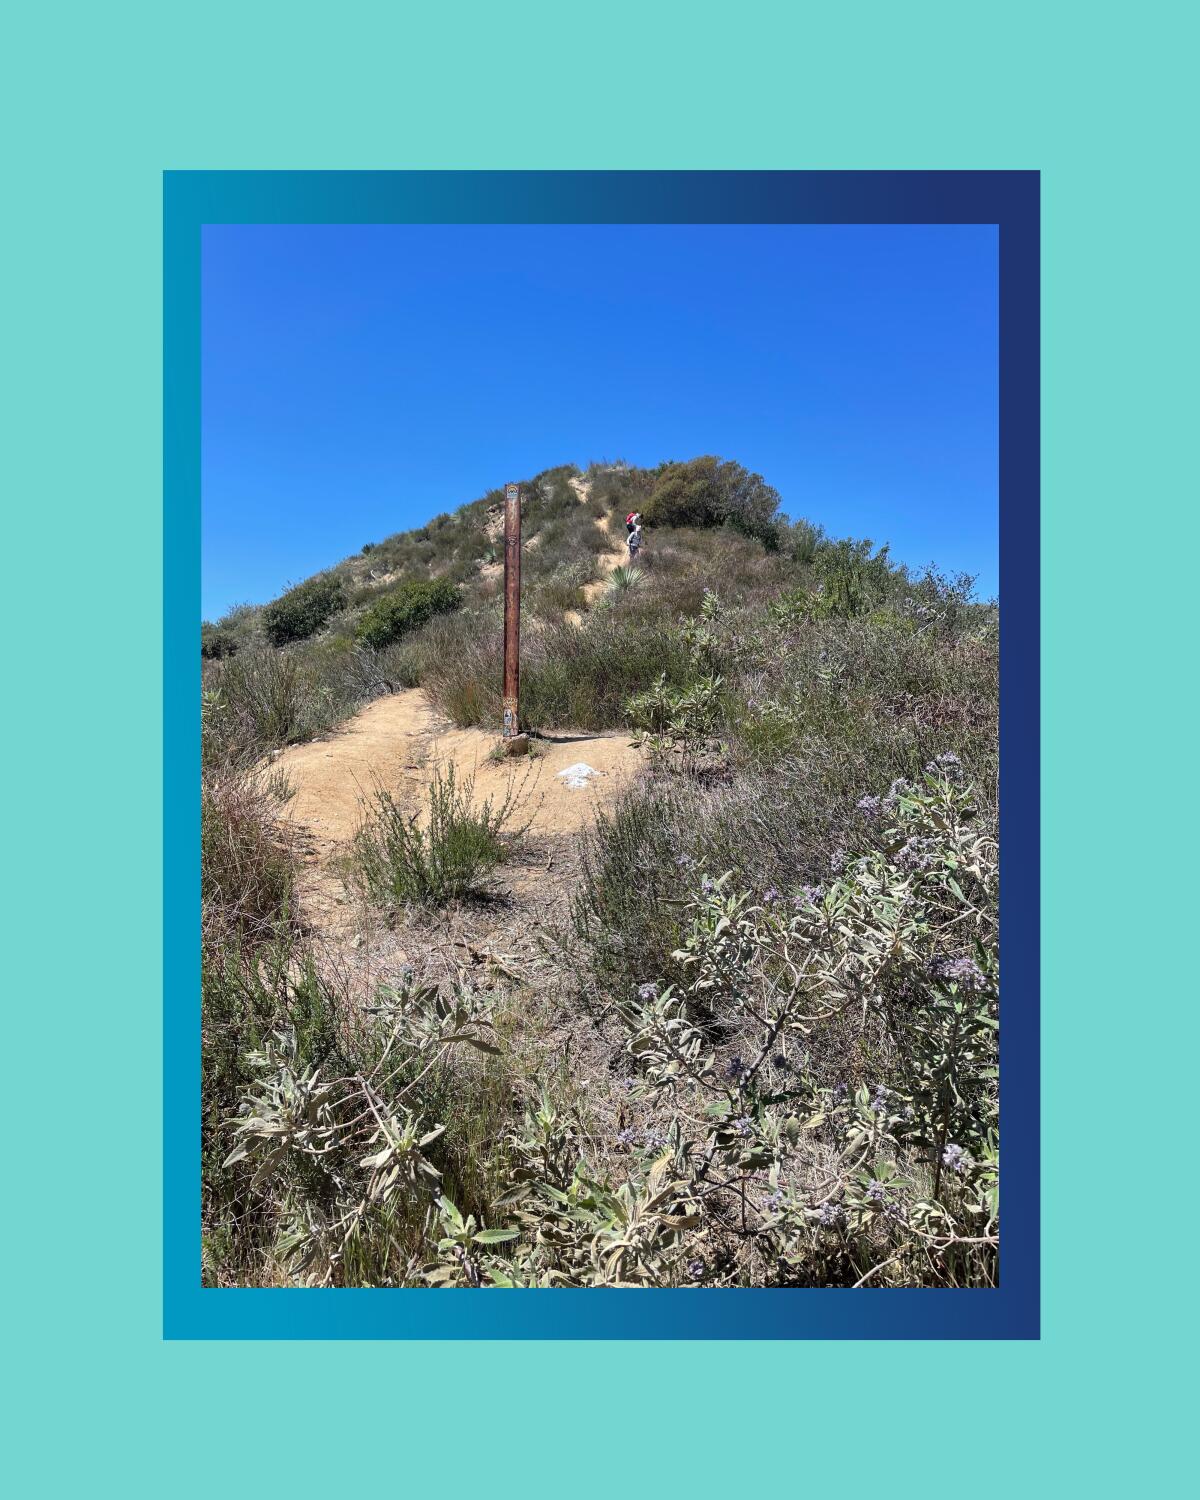 A hilltop in the Angeles National Forest.